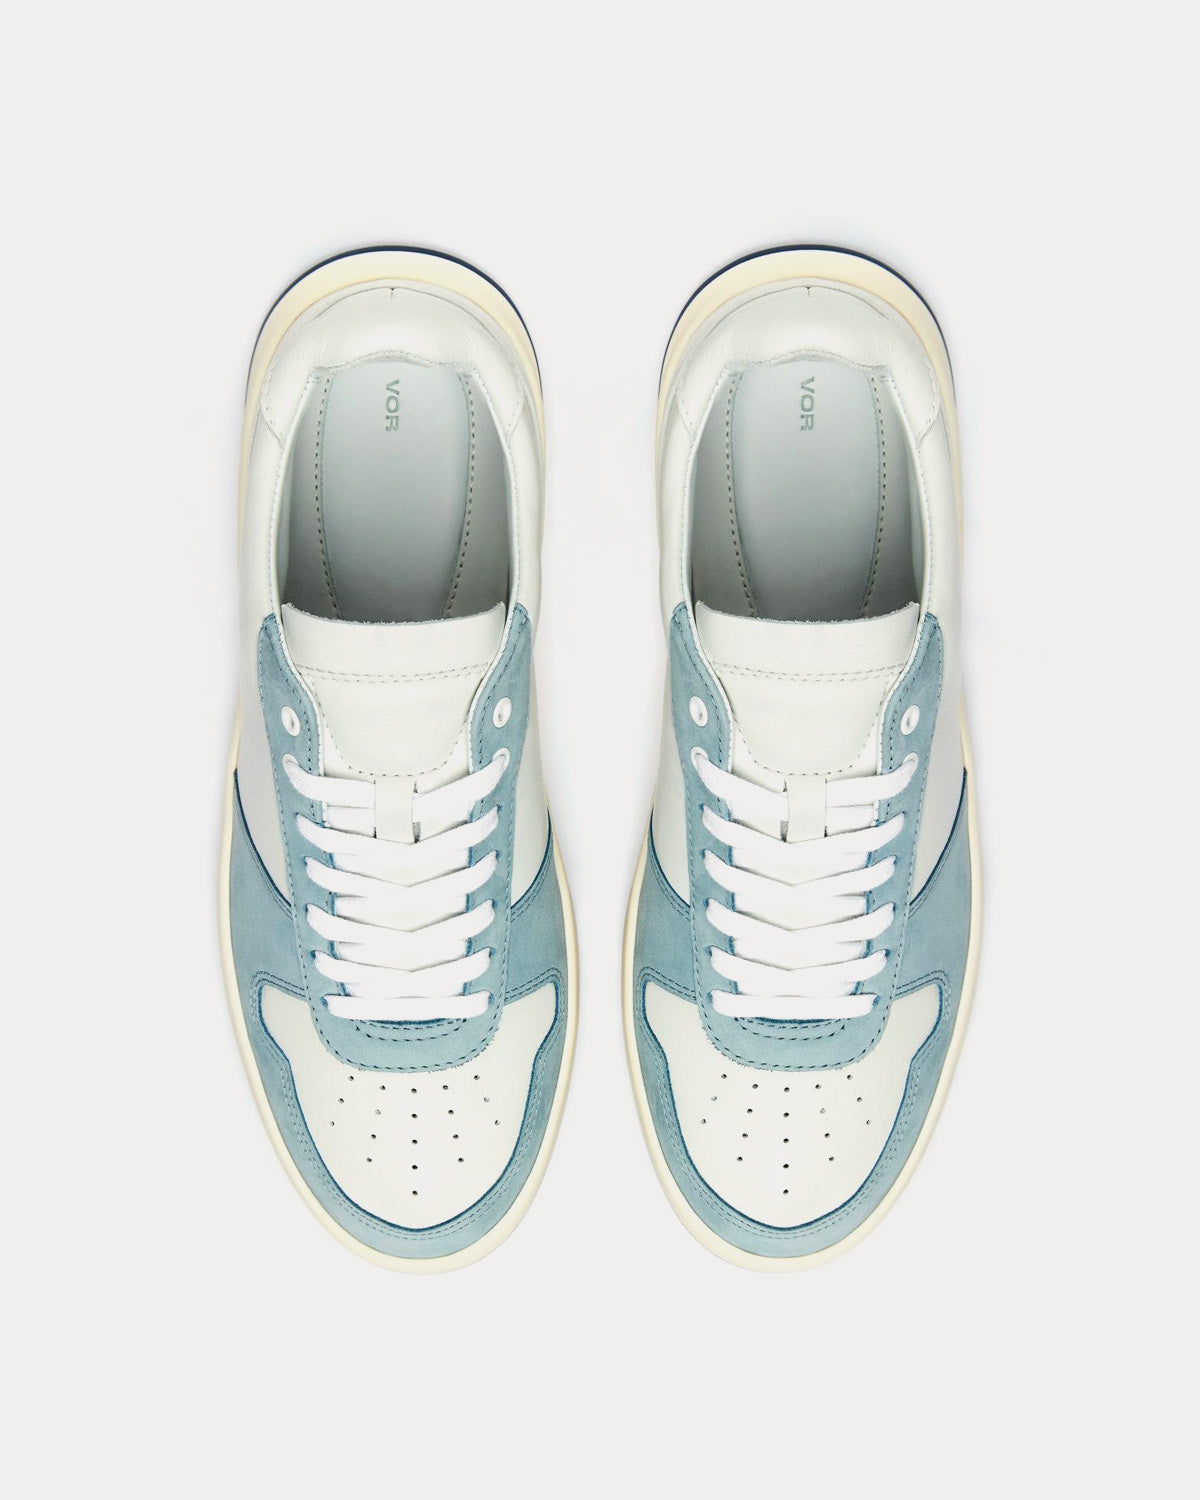 Vor - 5A MIAMIBLAU Blue / Off-White Low Top Sneakers